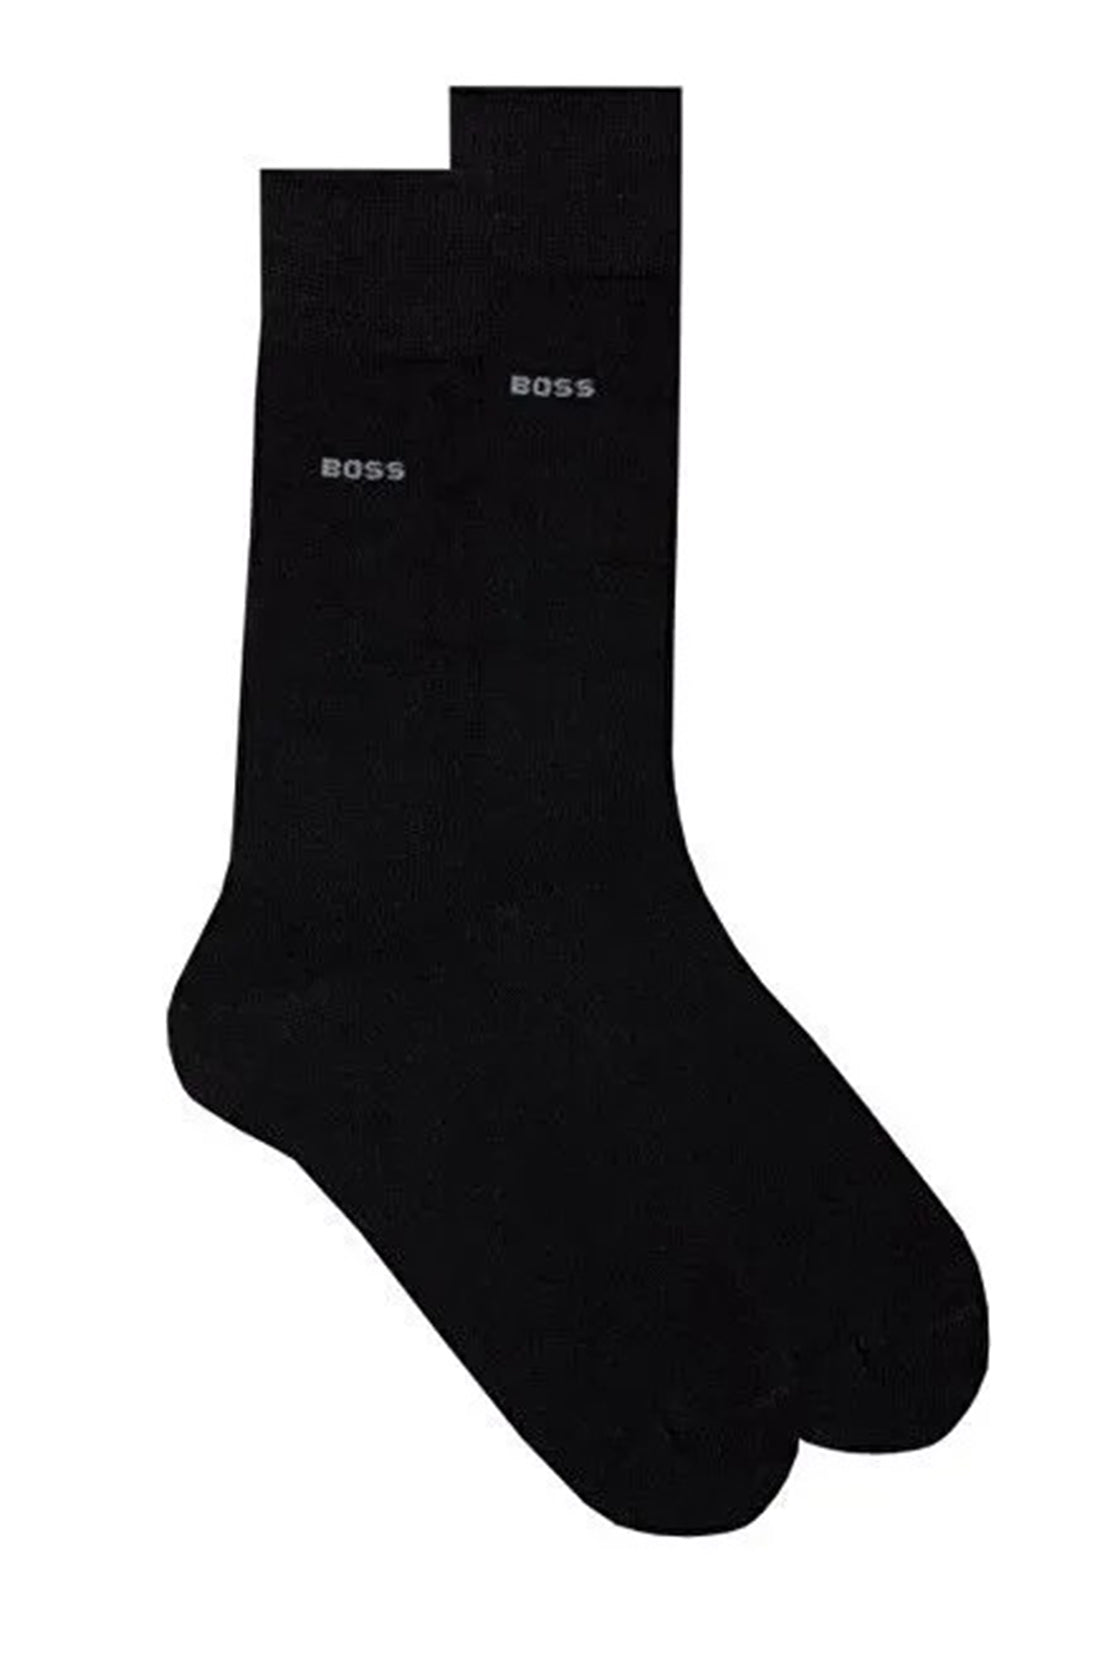 BOSS - 2 Pack Of Bamboo Touch Socks in Stretch Yarns in Black 50491196 001